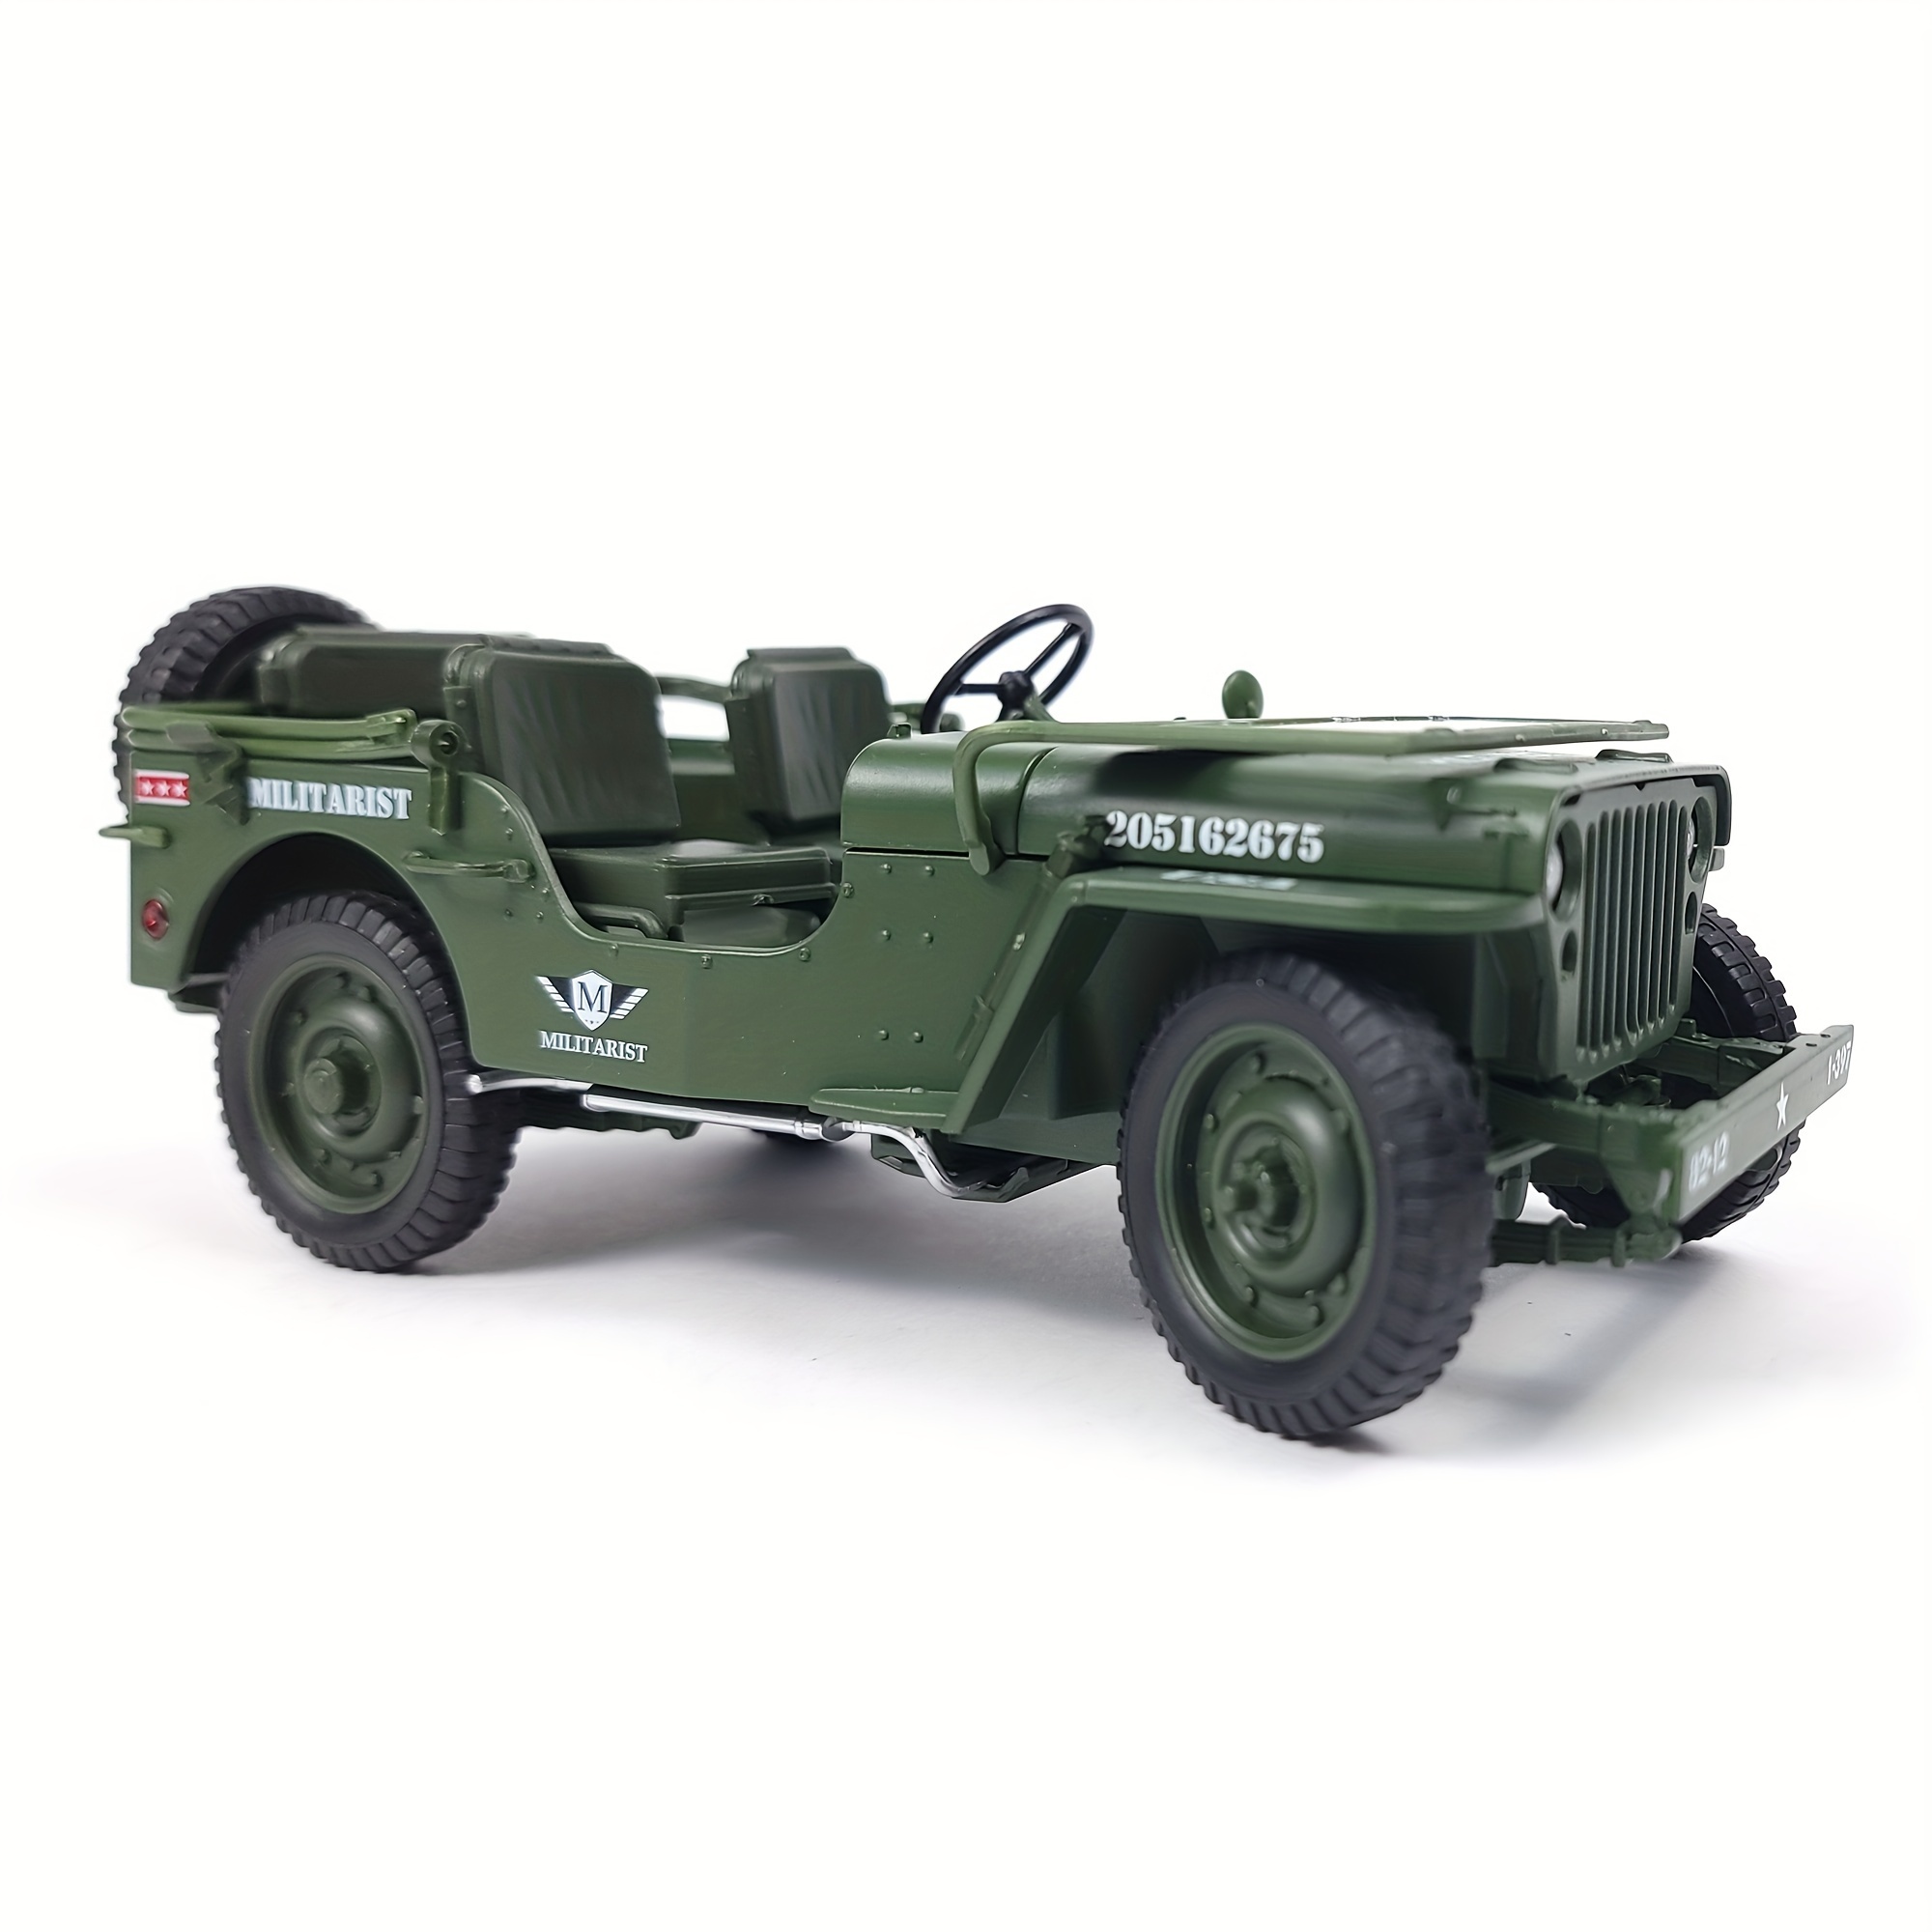 

Scale Willis Tactical Model Car Metal Diecast Military Armored Vehicle Battlefield Model Toy Collection Gift